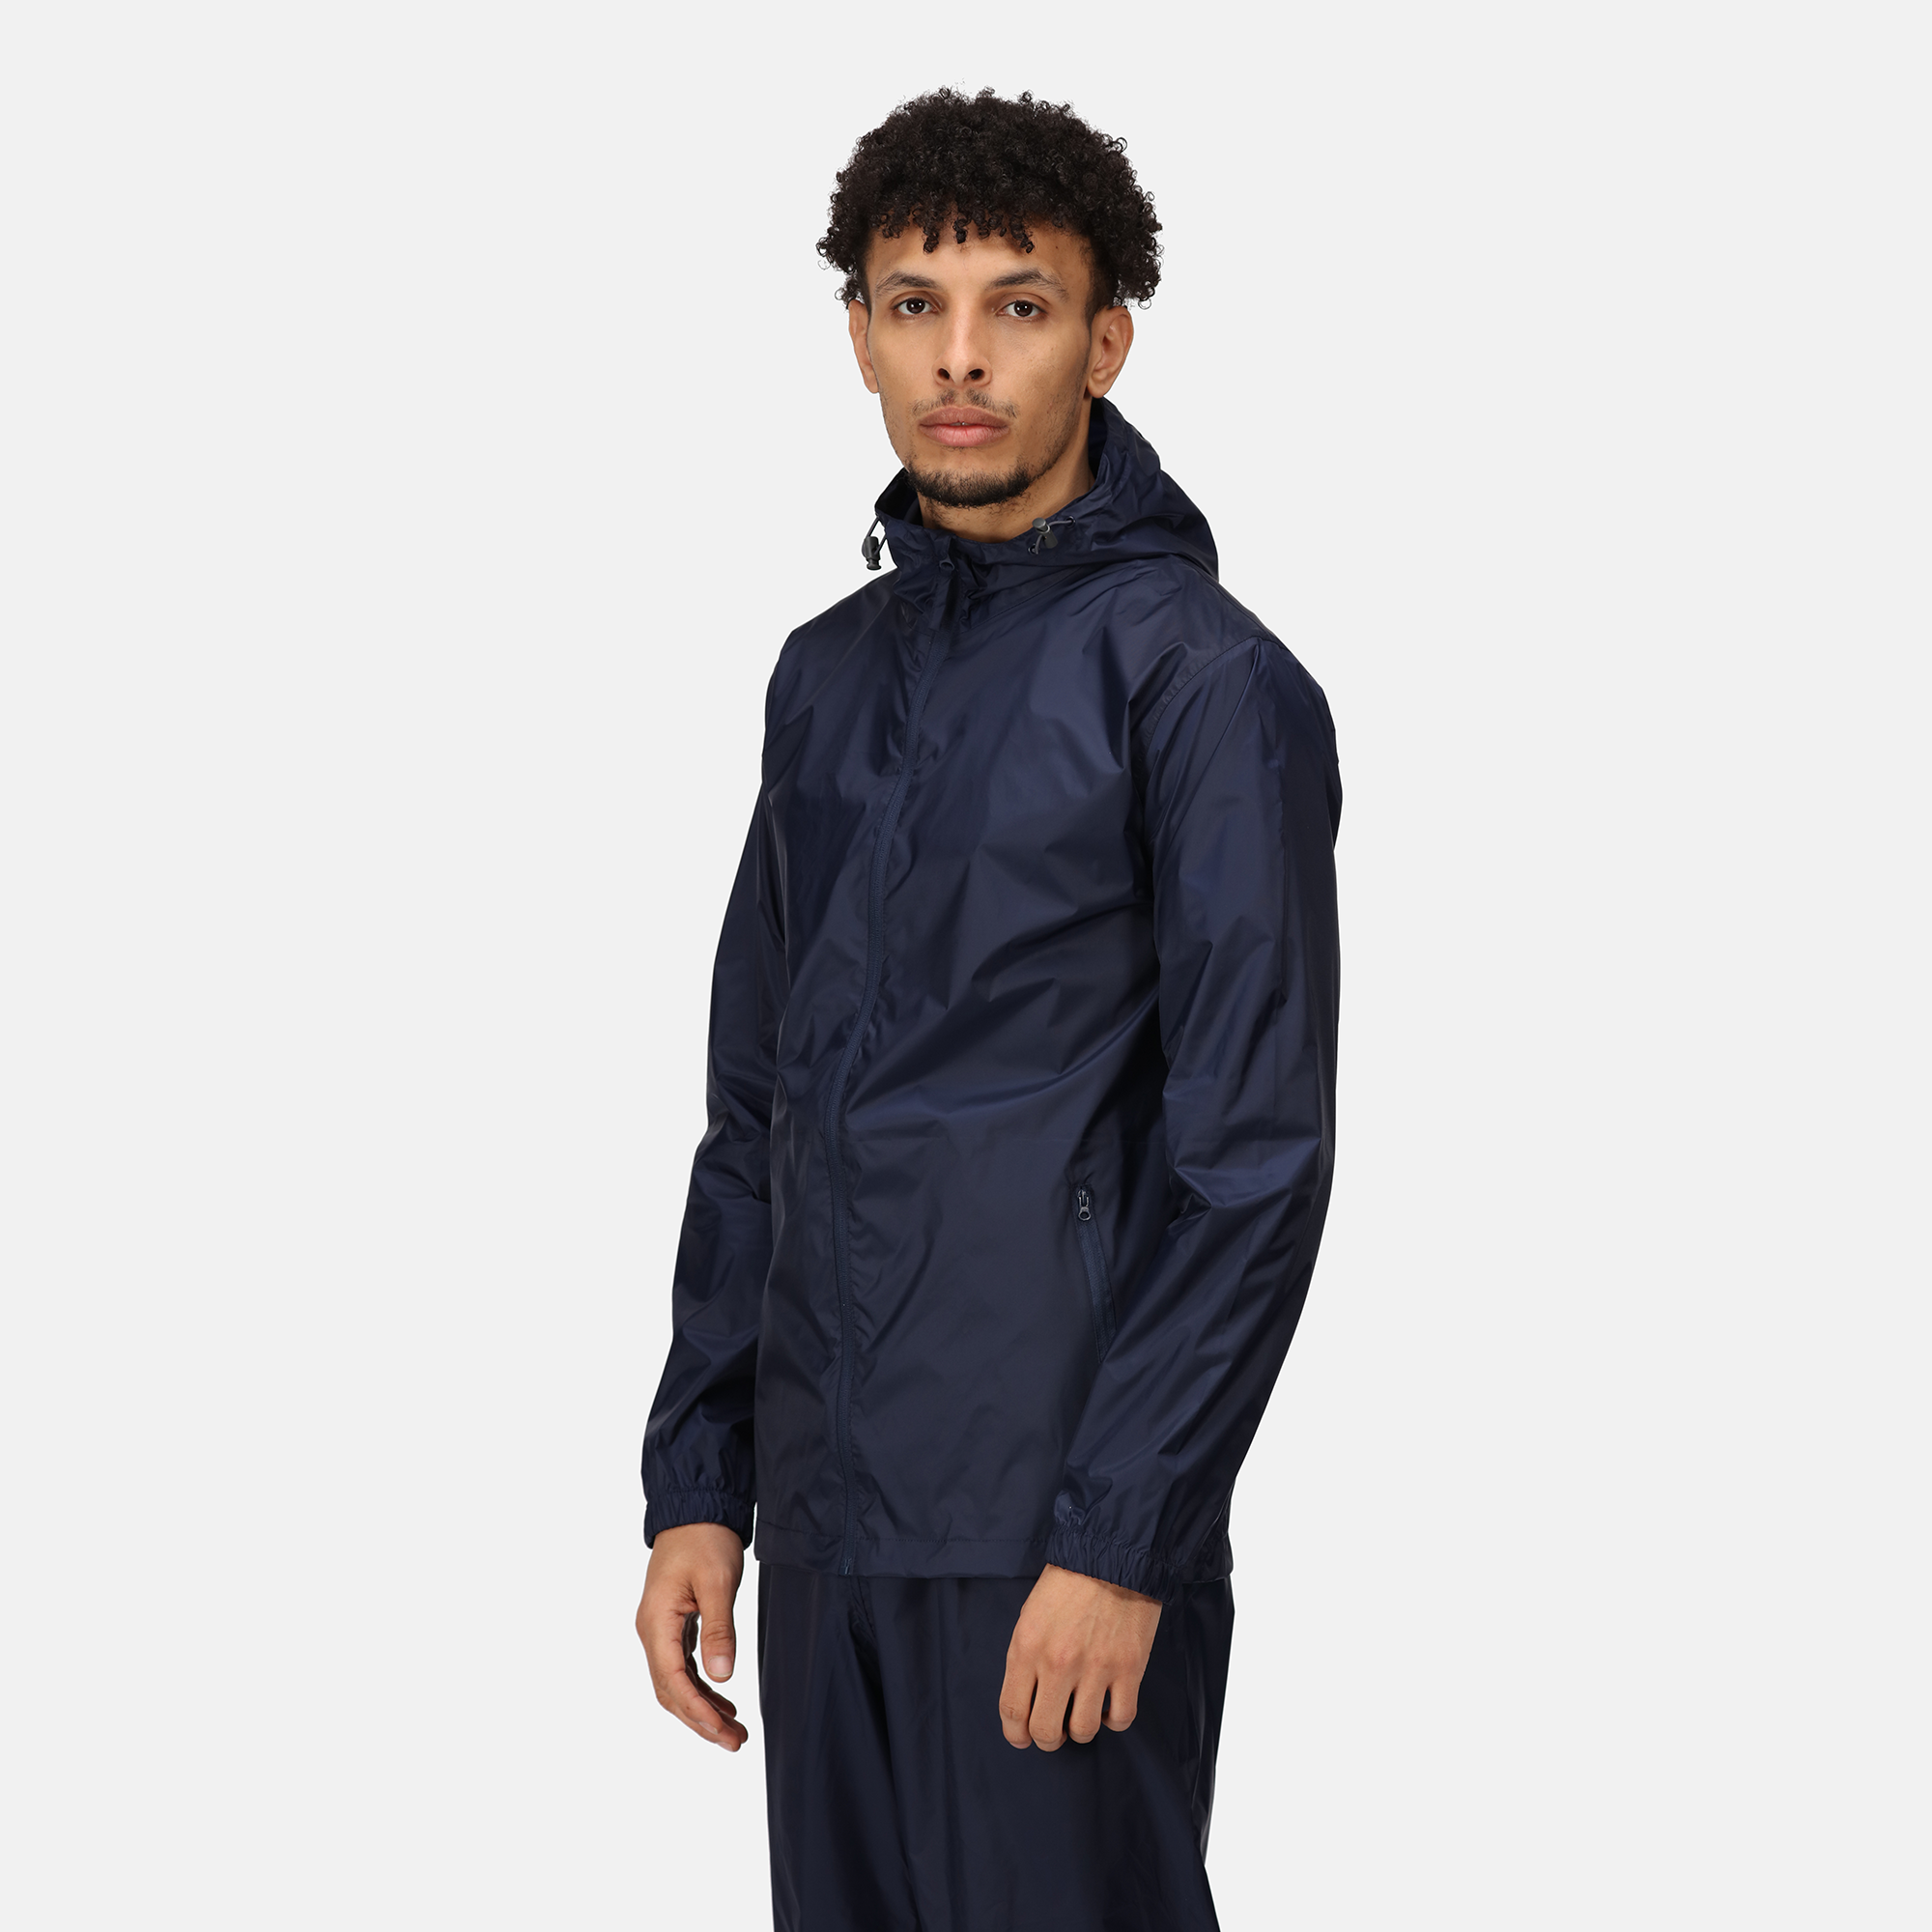 PRO PACKAWAY BREATHABLE JACKET AND OVERTROUSERS - Regatta Professional